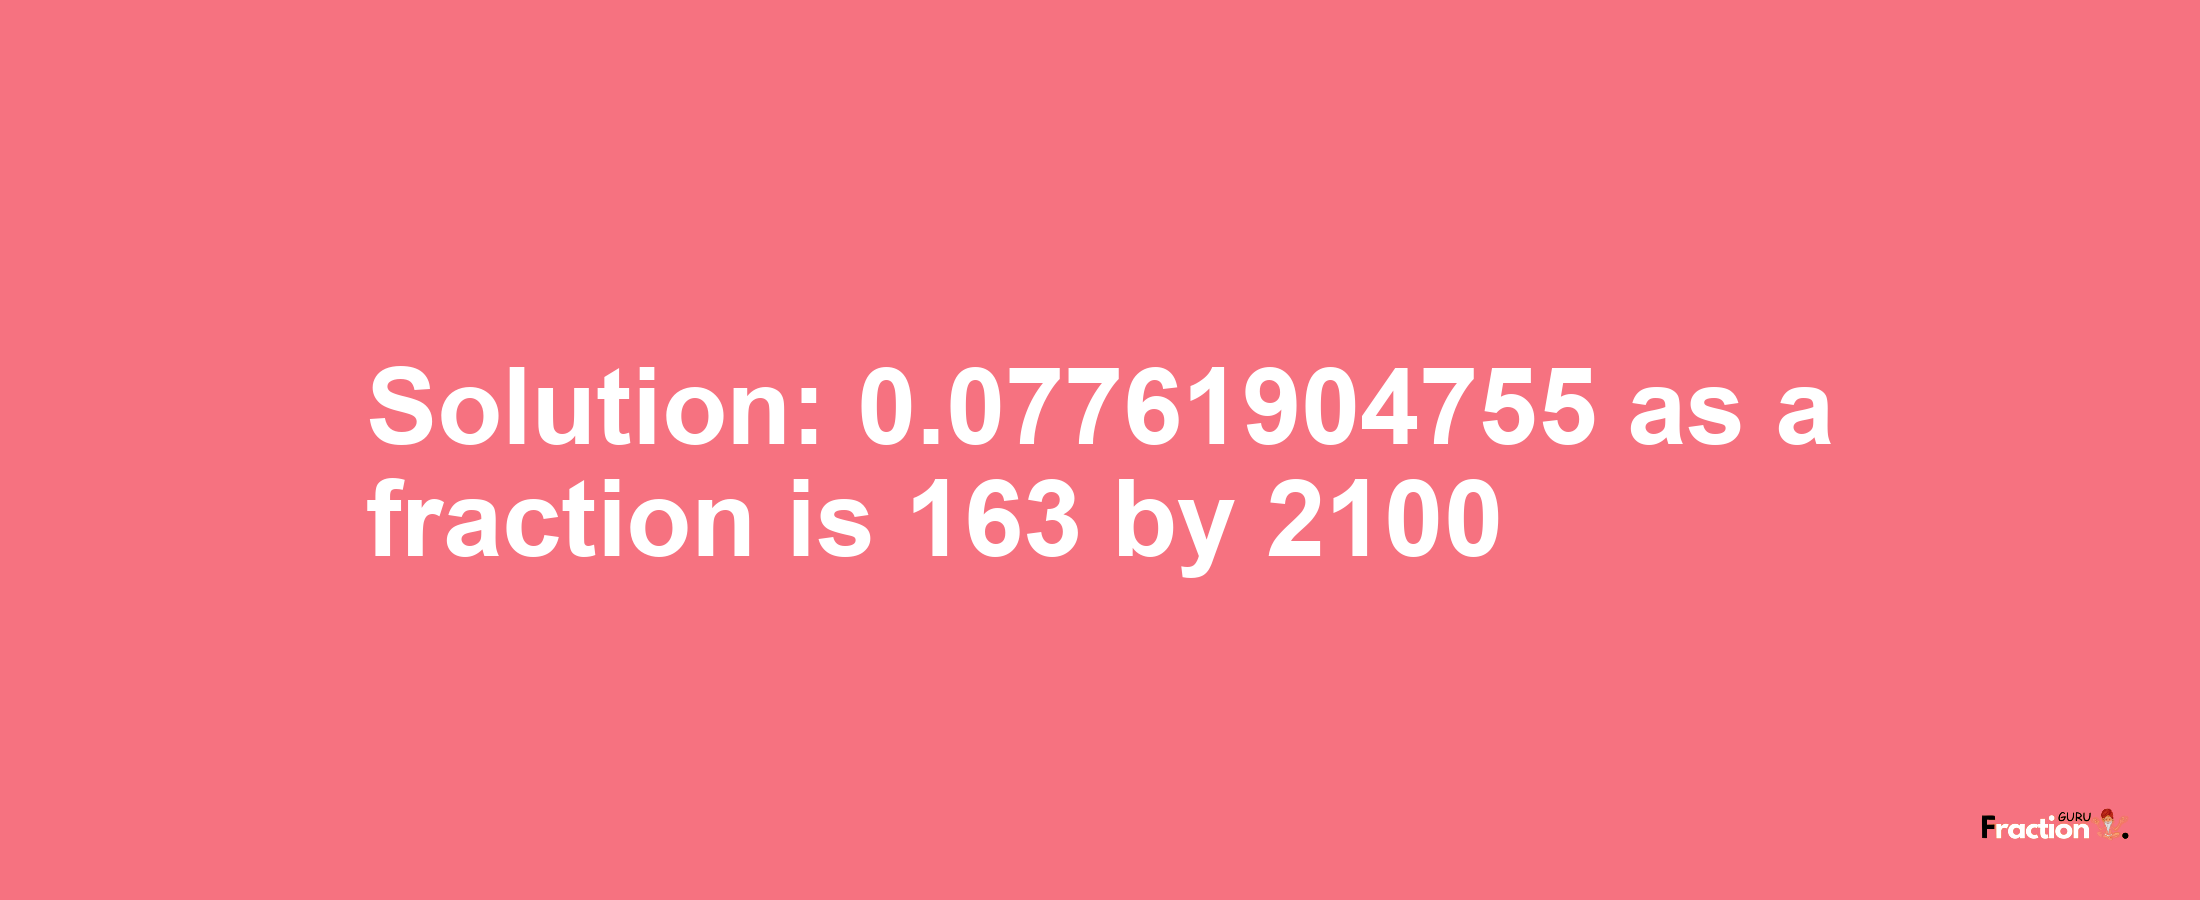 Solution:0.07761904755 as a fraction is 163/2100